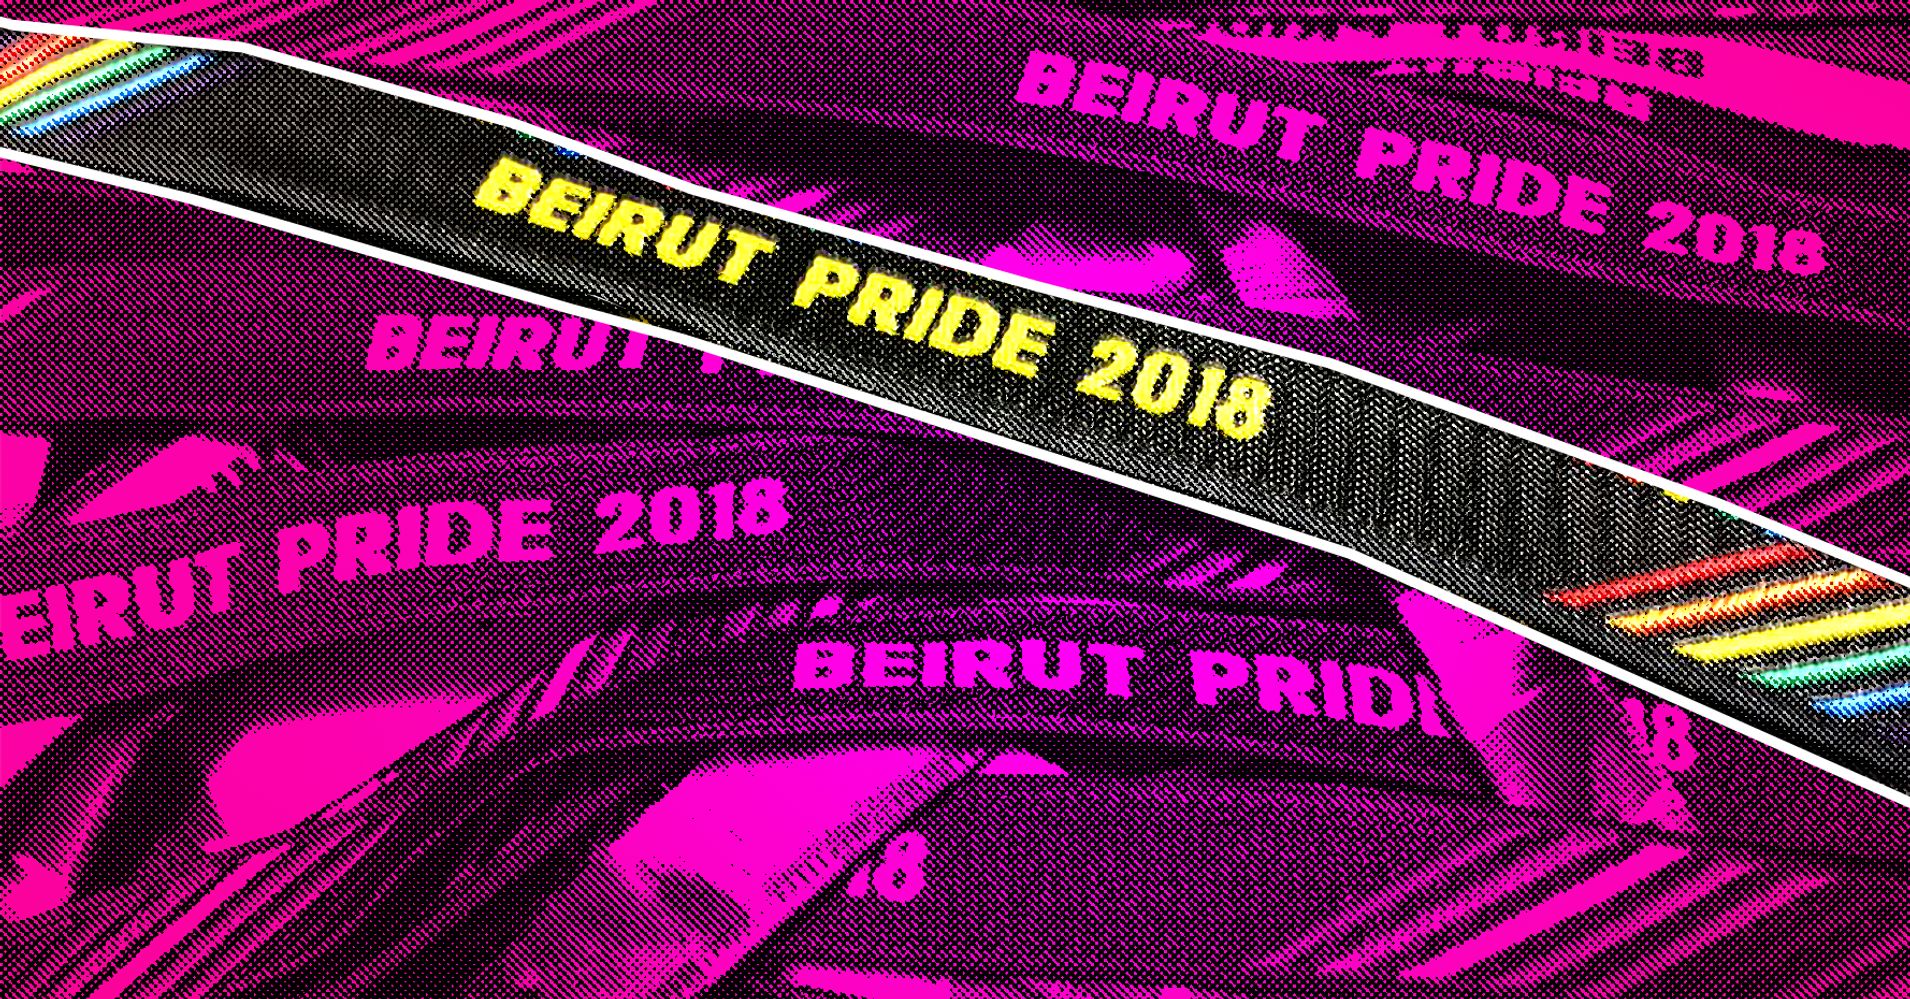 Beirut Pride Was Forcibly Canceled. Lebanon's LGBTQ Community Remains